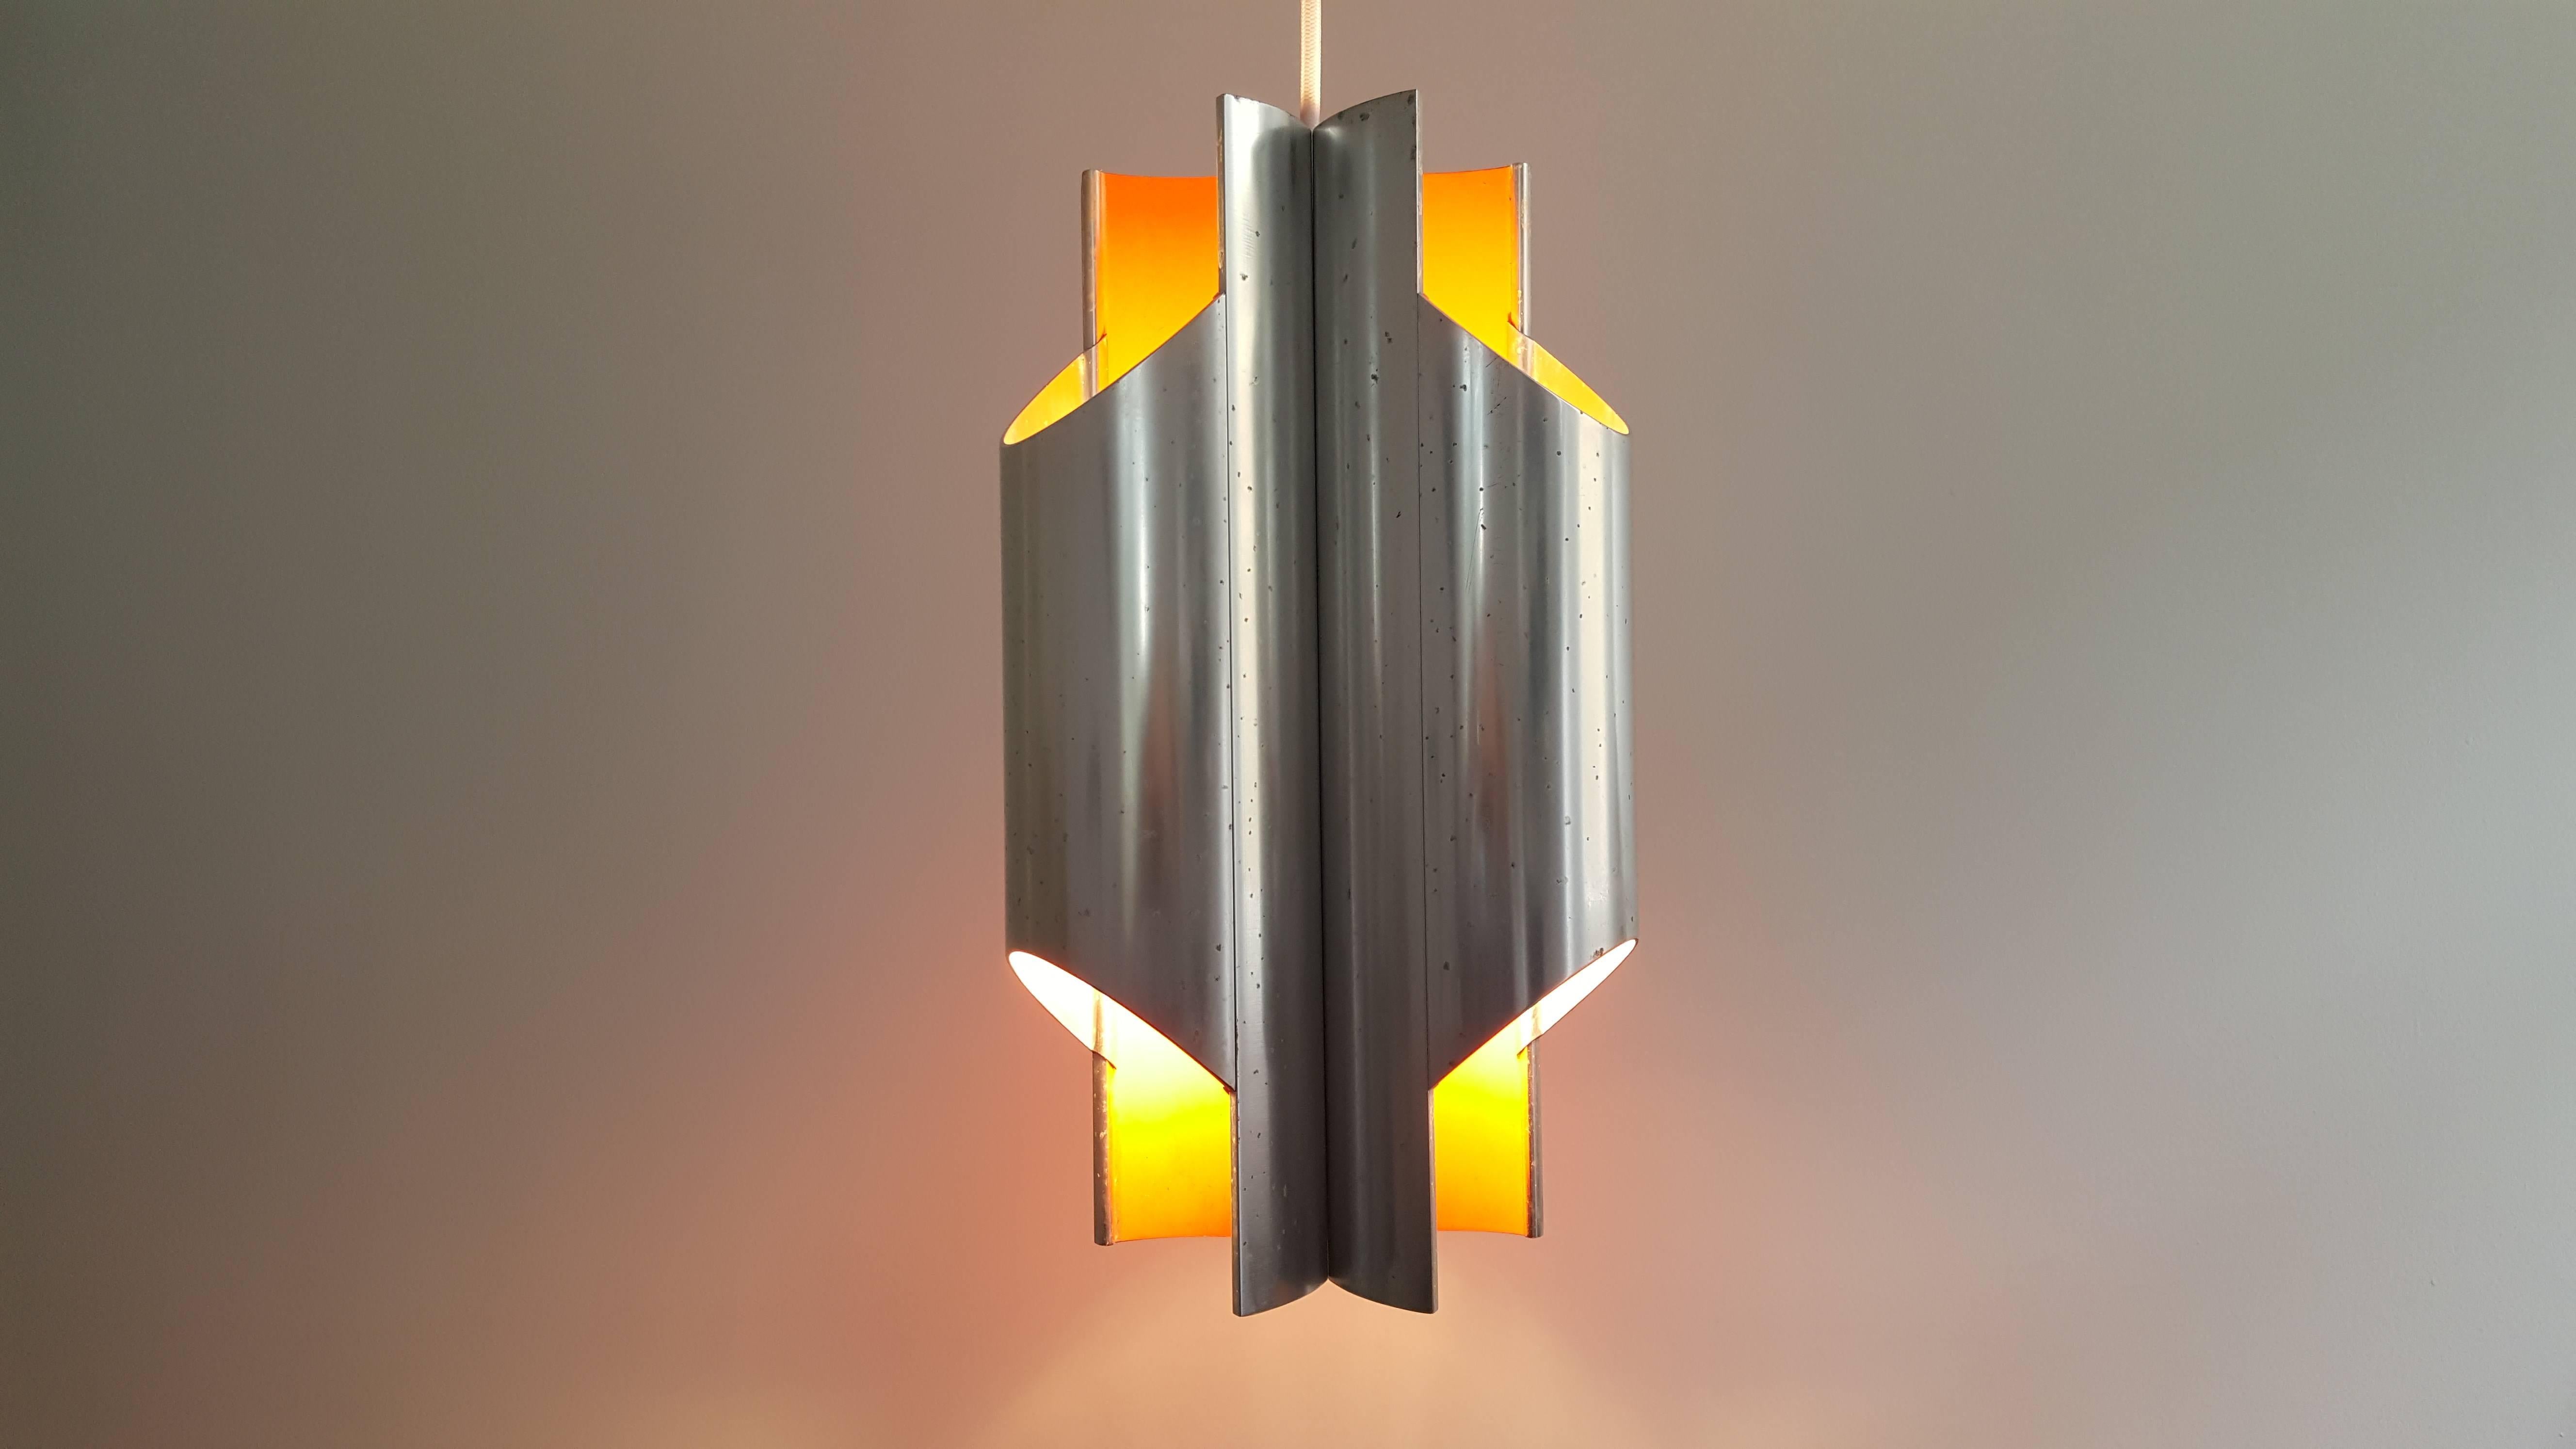 Bent Karlby 'Pantre' pendant for Lyfa, 1970.

The 'Pantre' pendant, referring to three (tre) pan flute designed aluminium elements was designed by Bent Karlby and produced by Lyfa. Each section has an red/orange inner along with a bulb holder, the